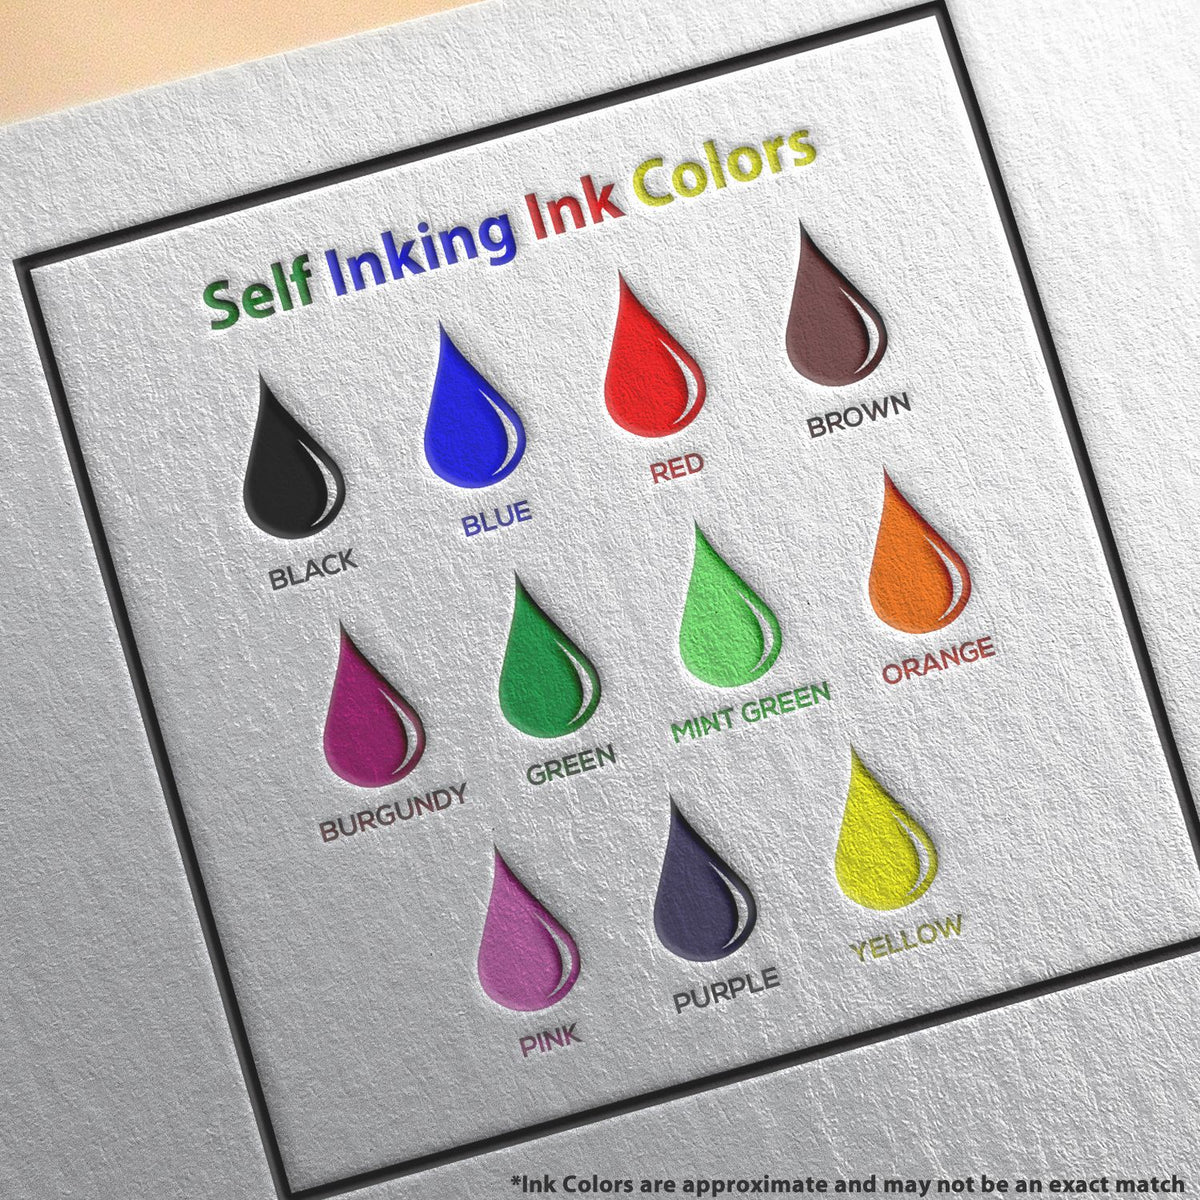 A picture showing the different ink colors or hues available for the Self-Inking Rectangular Rhode Island Notary Stamp product.